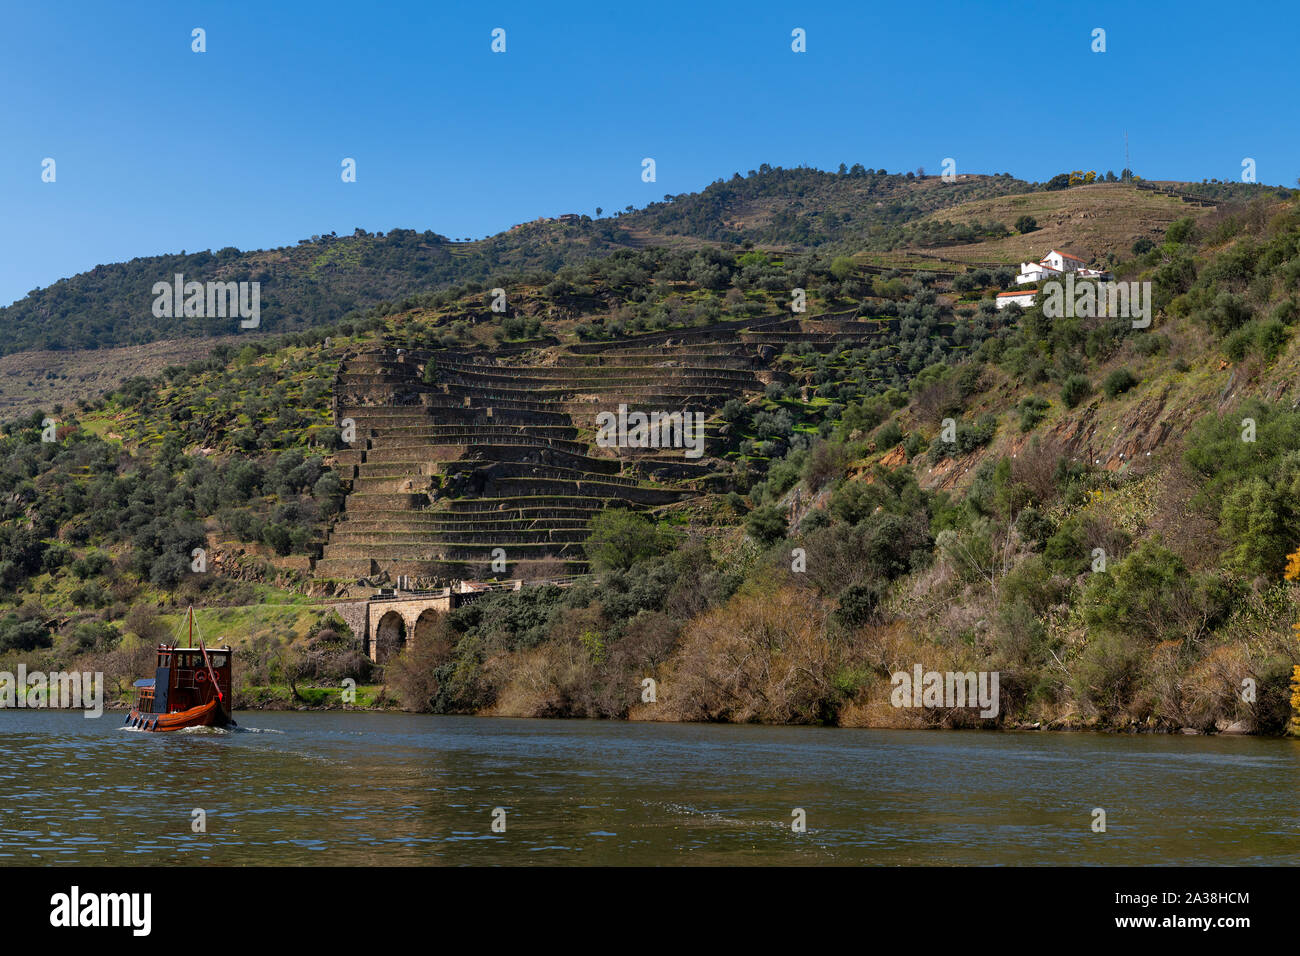 Scenic view of the Douro River with a traditional rabelo boat and terraced vineyards near the Tua village, in Portugal. Stock Photo